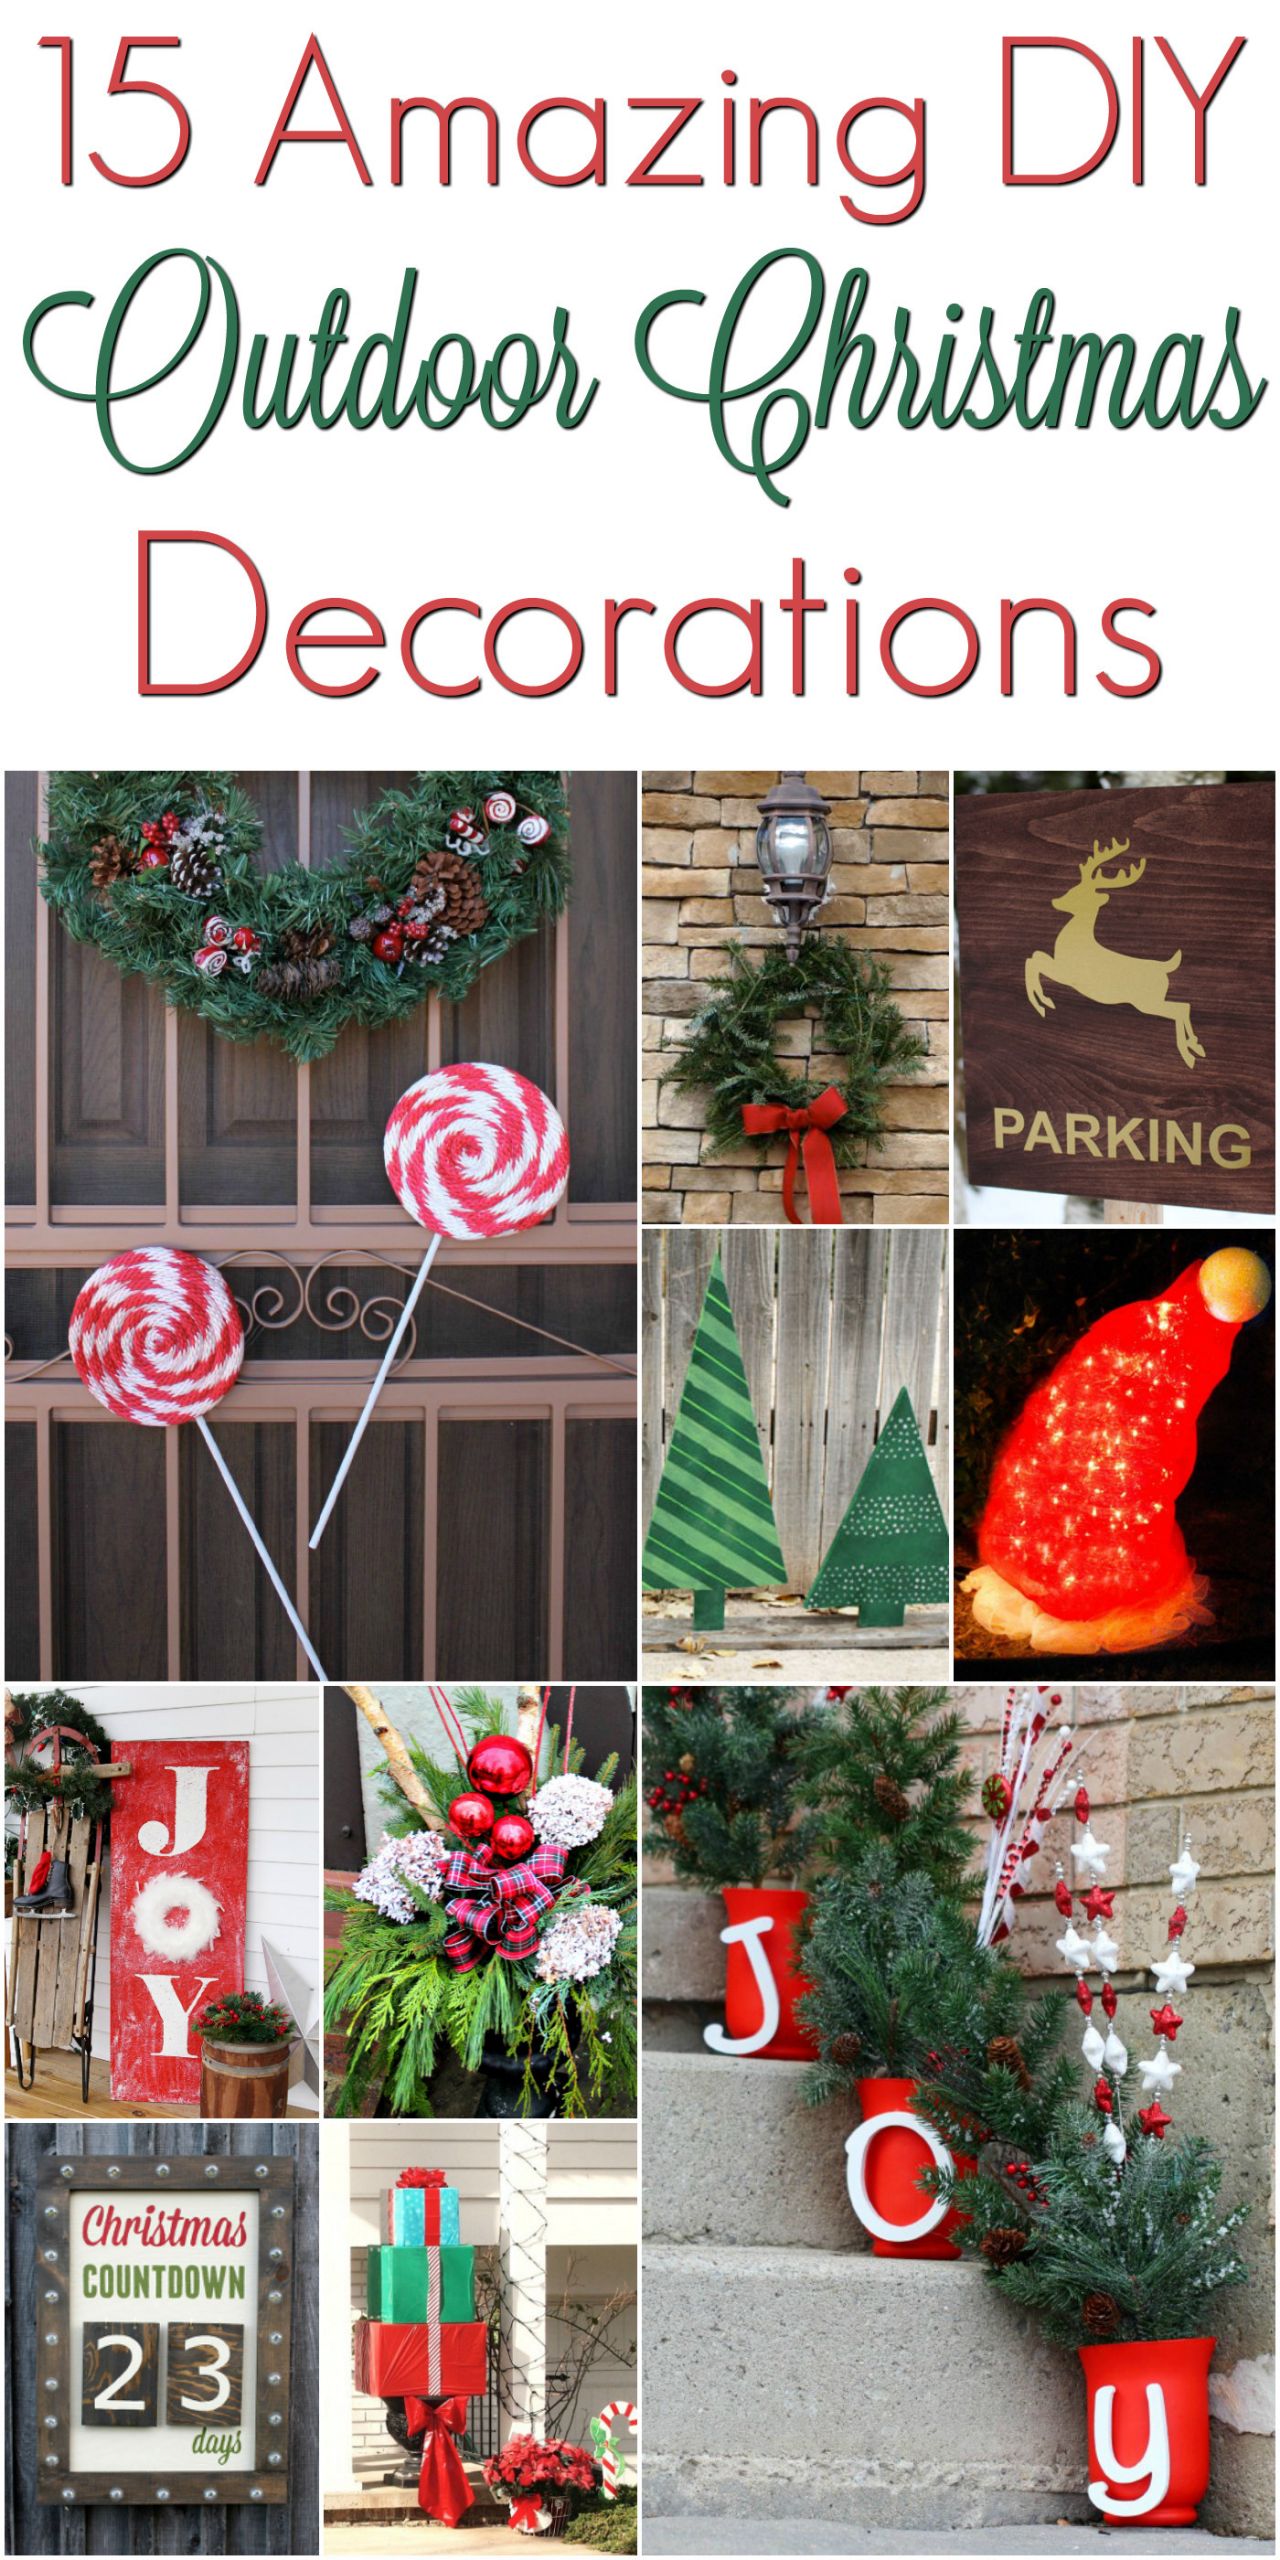 DIY Christmas Decorations For Outside
 DIY Christmas Outdoor Decorations ChristmasDecorations